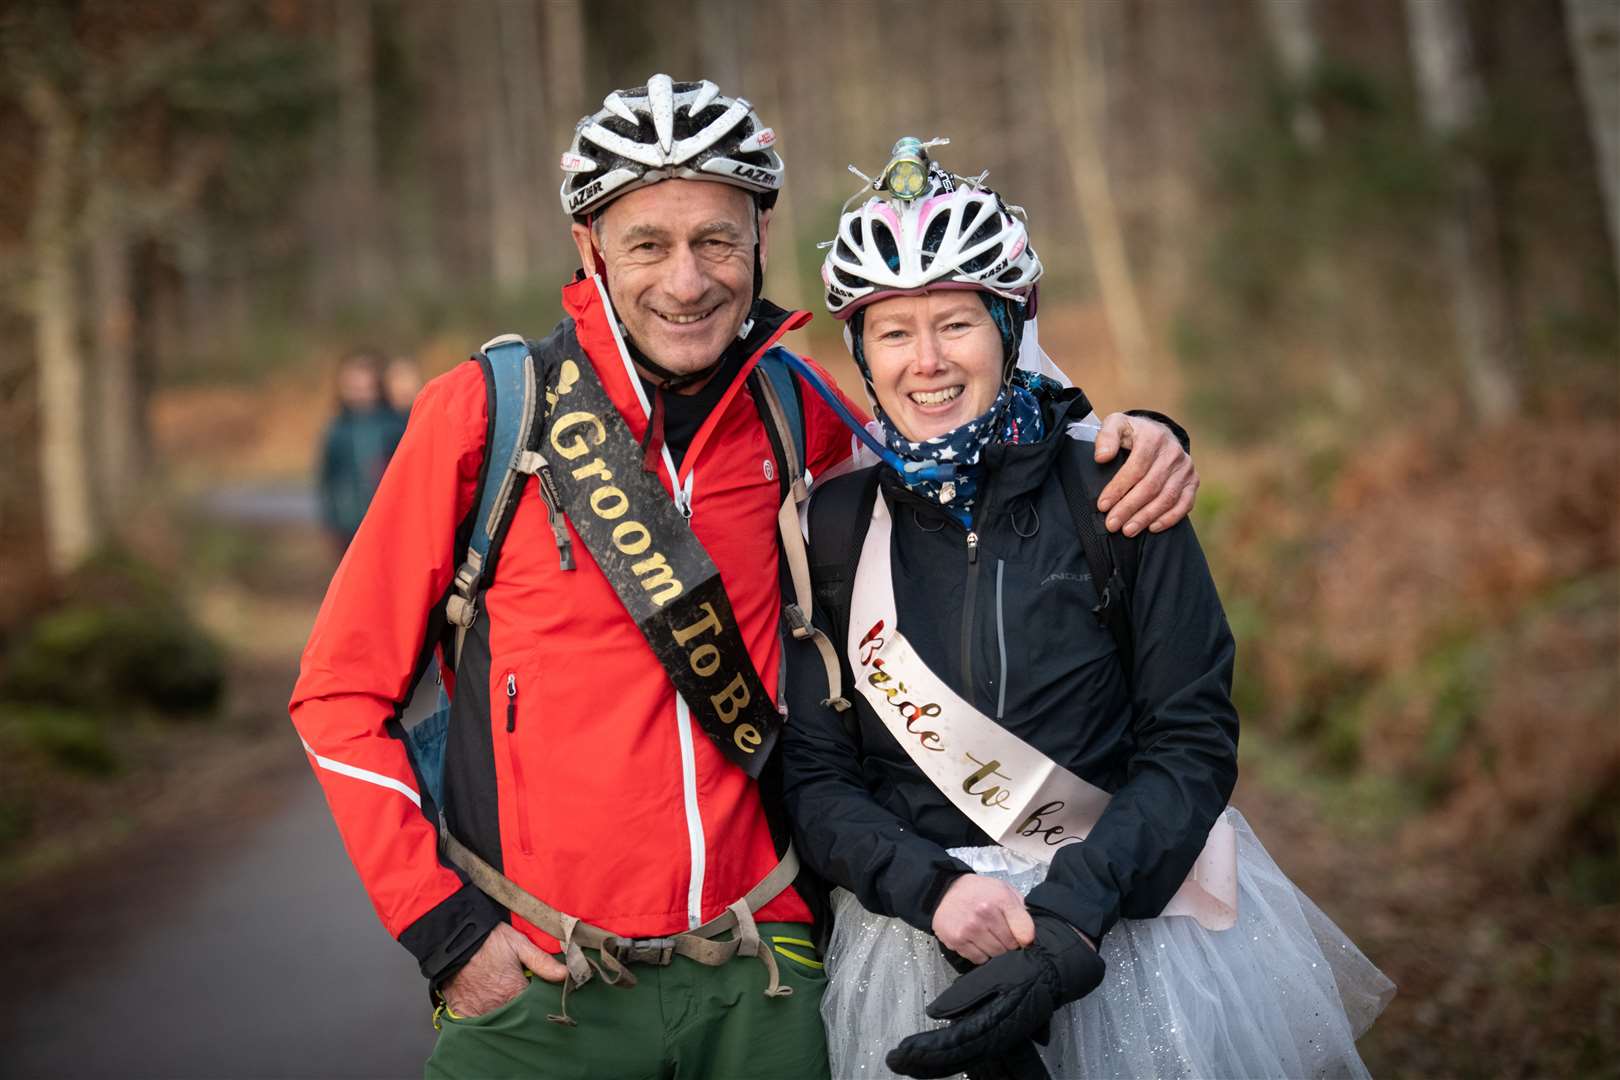 Strathpuffer 2024 24-hour endurance event. Steve Brown and Tracy Munro got married at the half way section of the track. Picture: Callum Mackay.